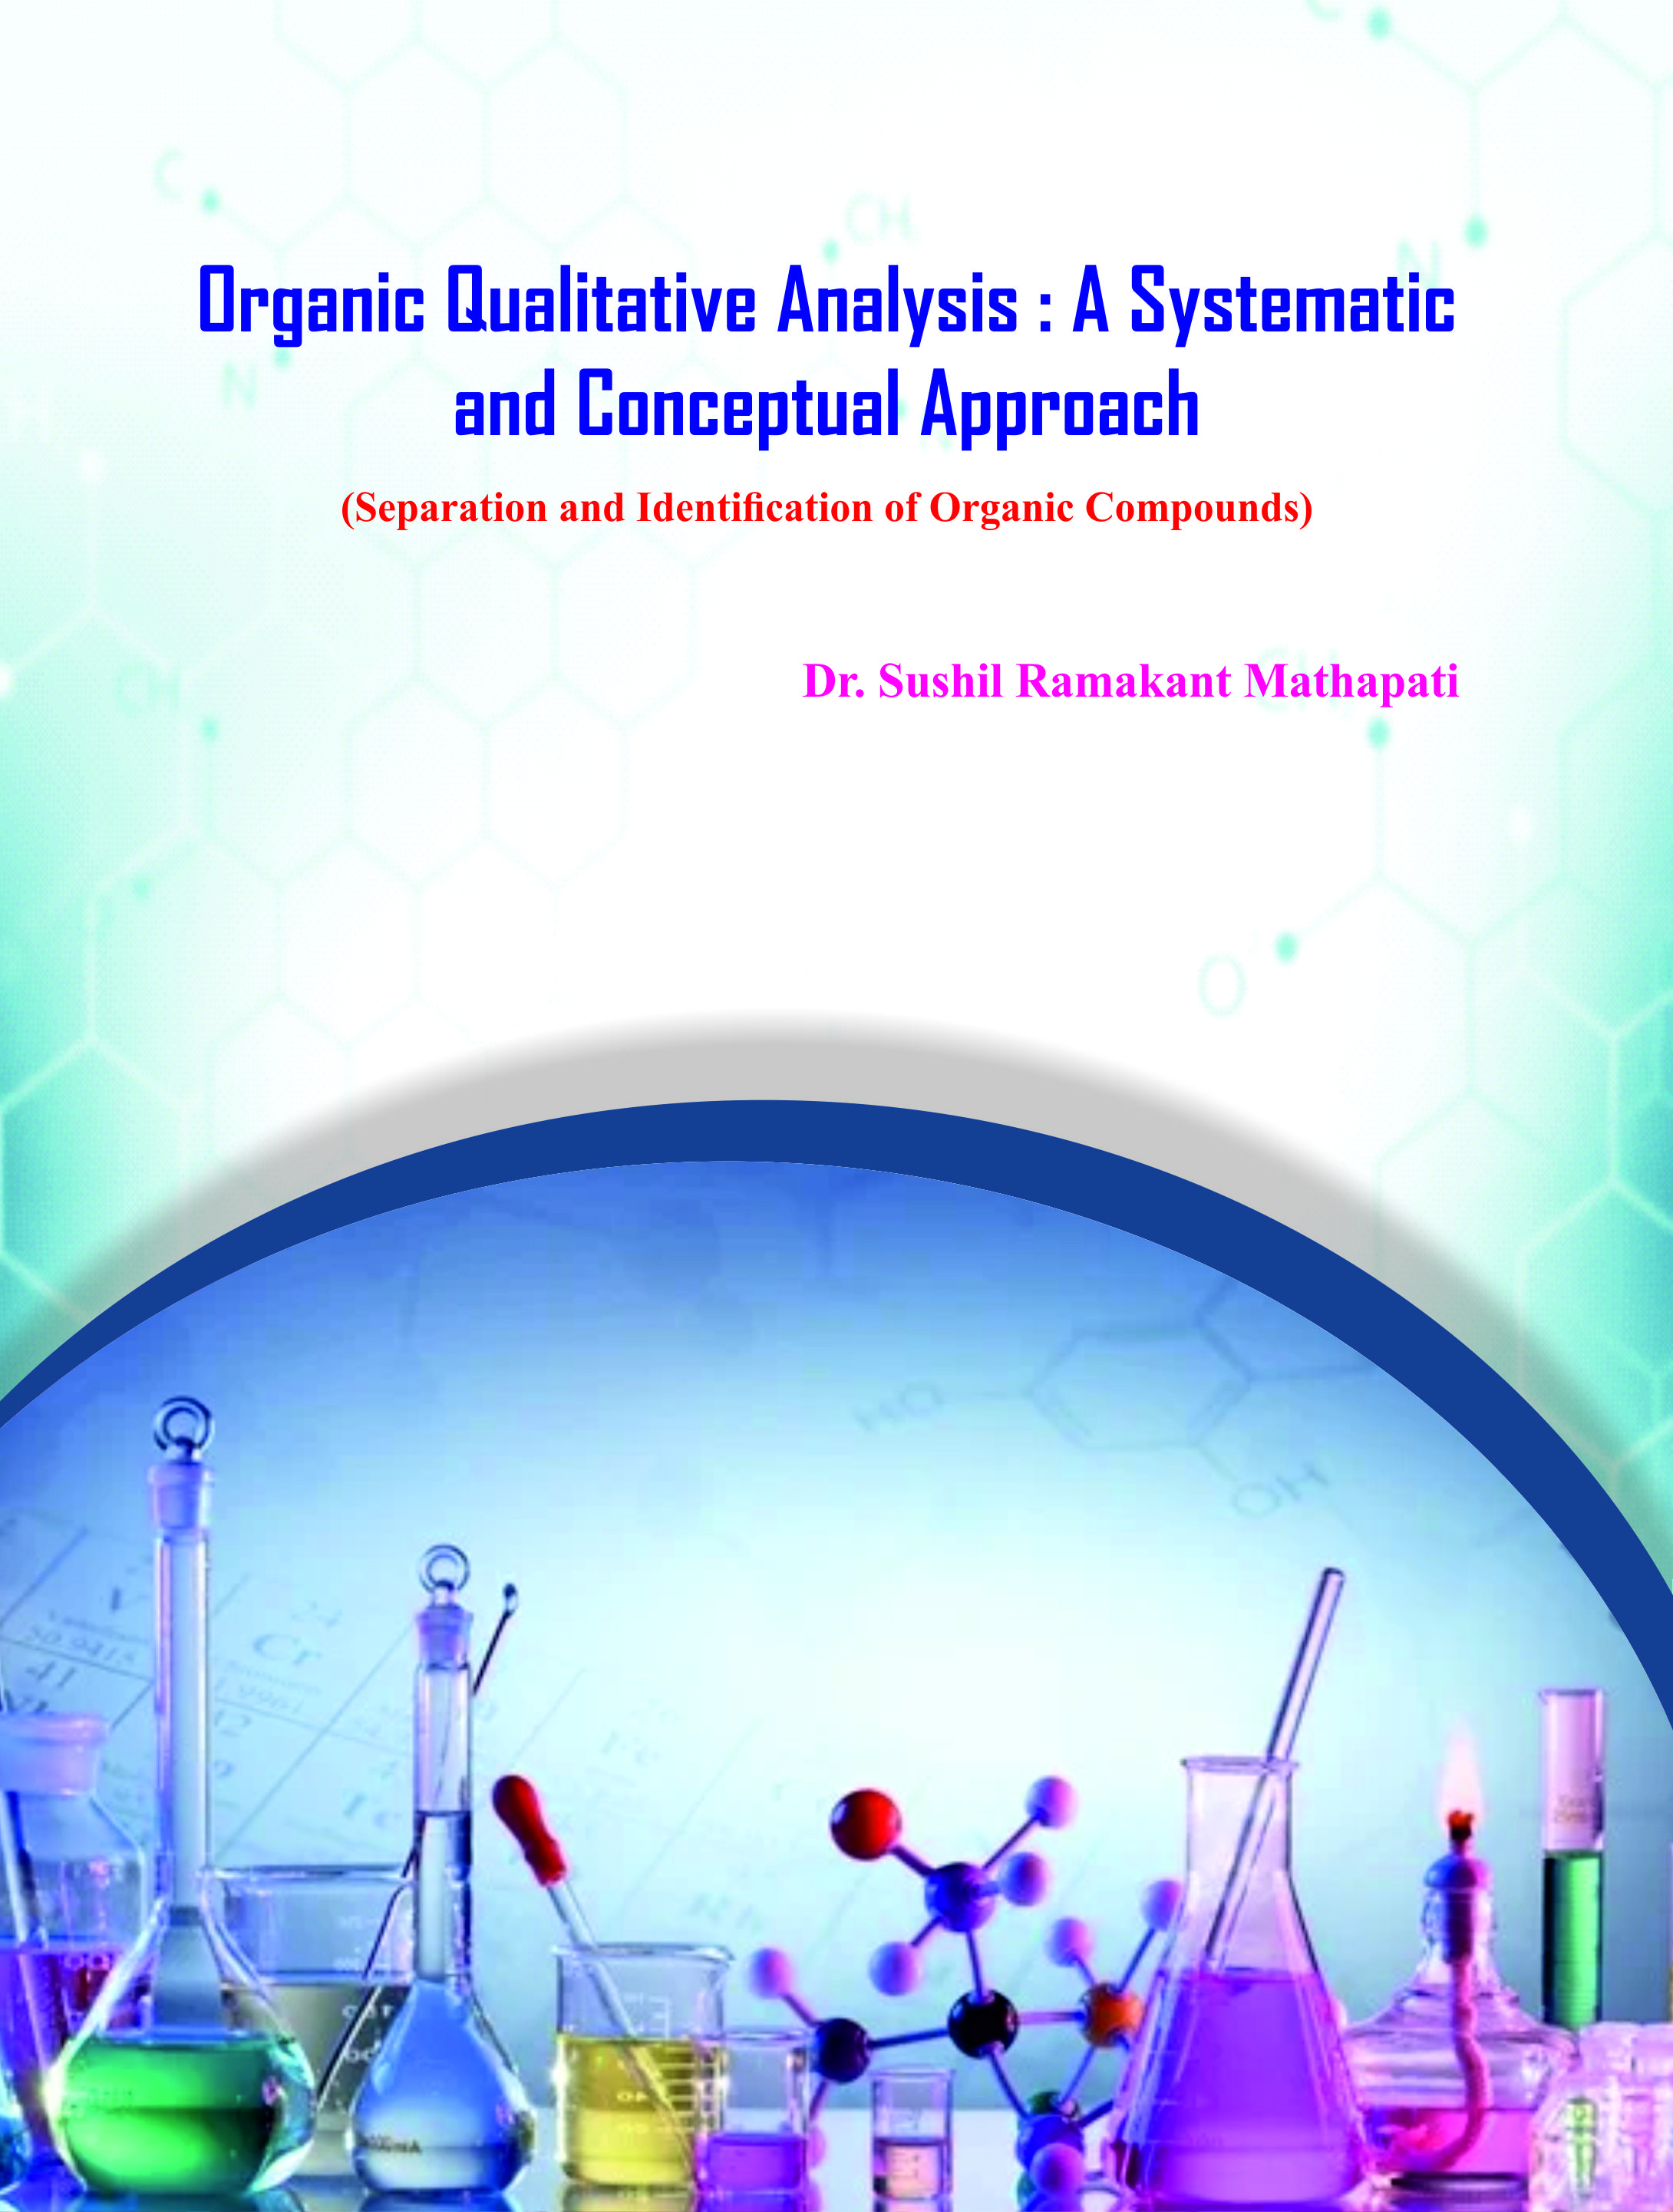 Organic Qualitative Analysis : A Systematic and Conceptual Approach (Separation and Identification of Organic Compounds)